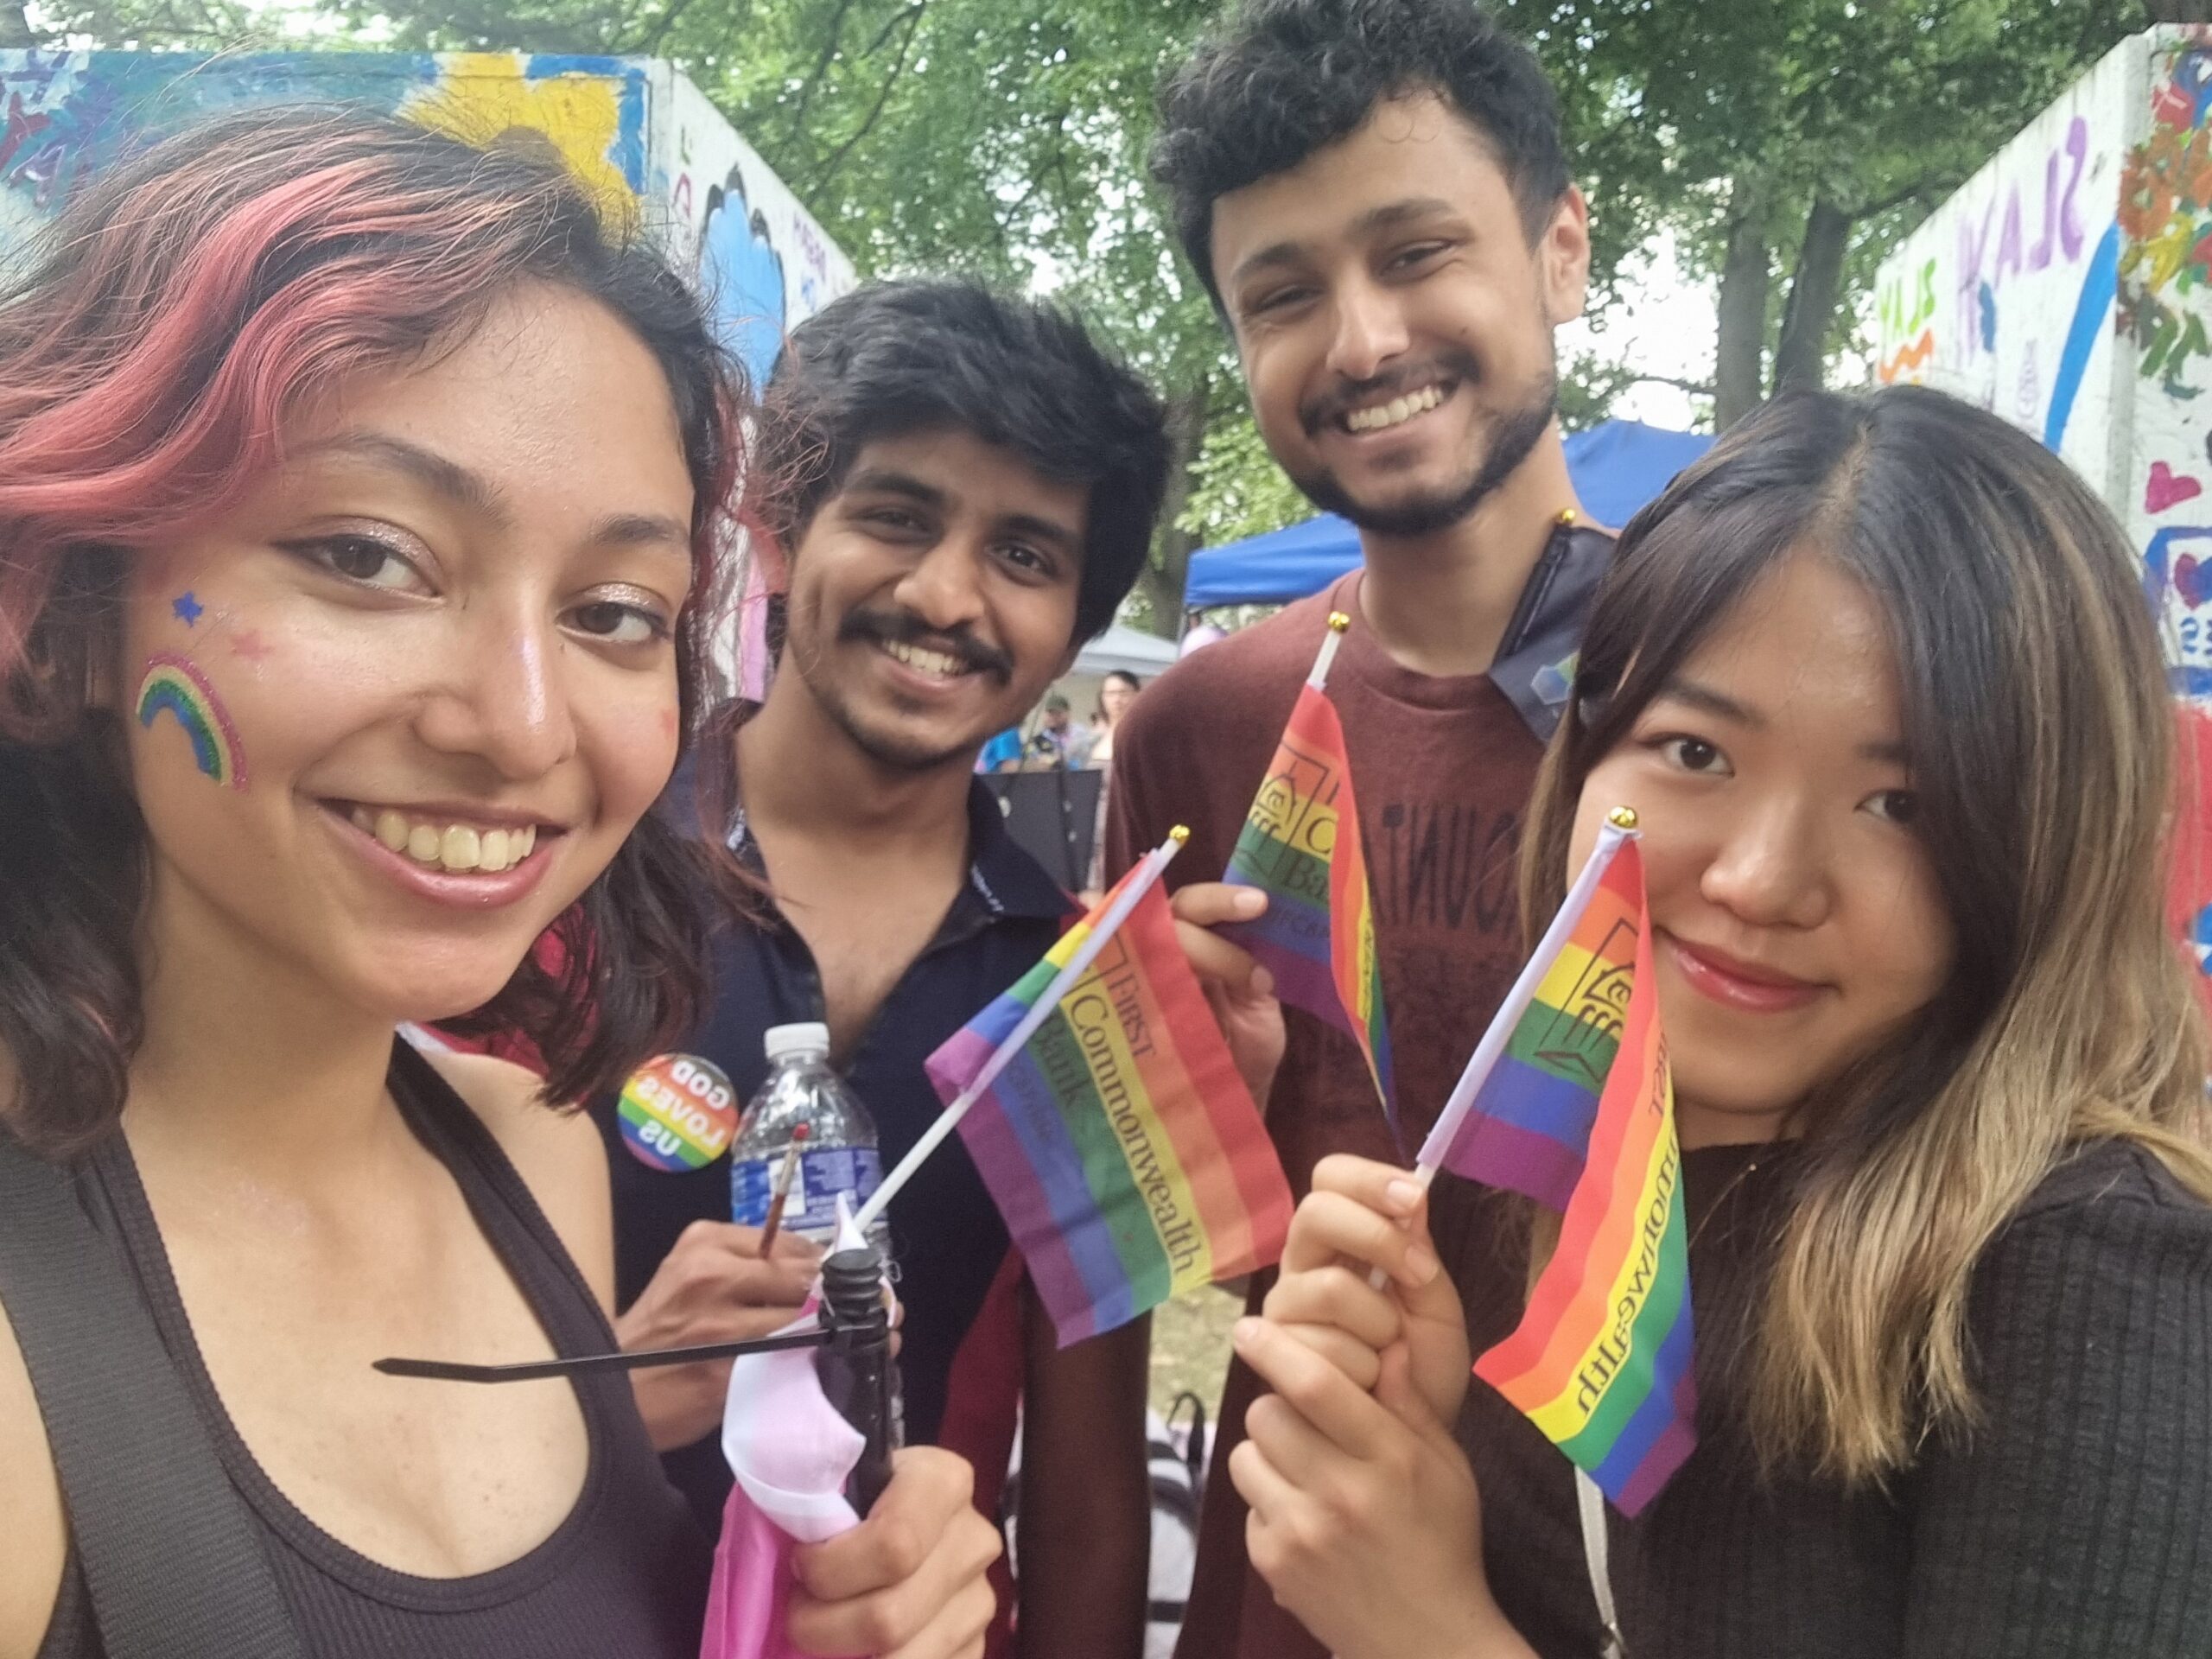 "First Pride Parade I ever attended. The unity, support, and the atmosphere were phenomenal. It is a great opportunity to learn more about people's beliefs.